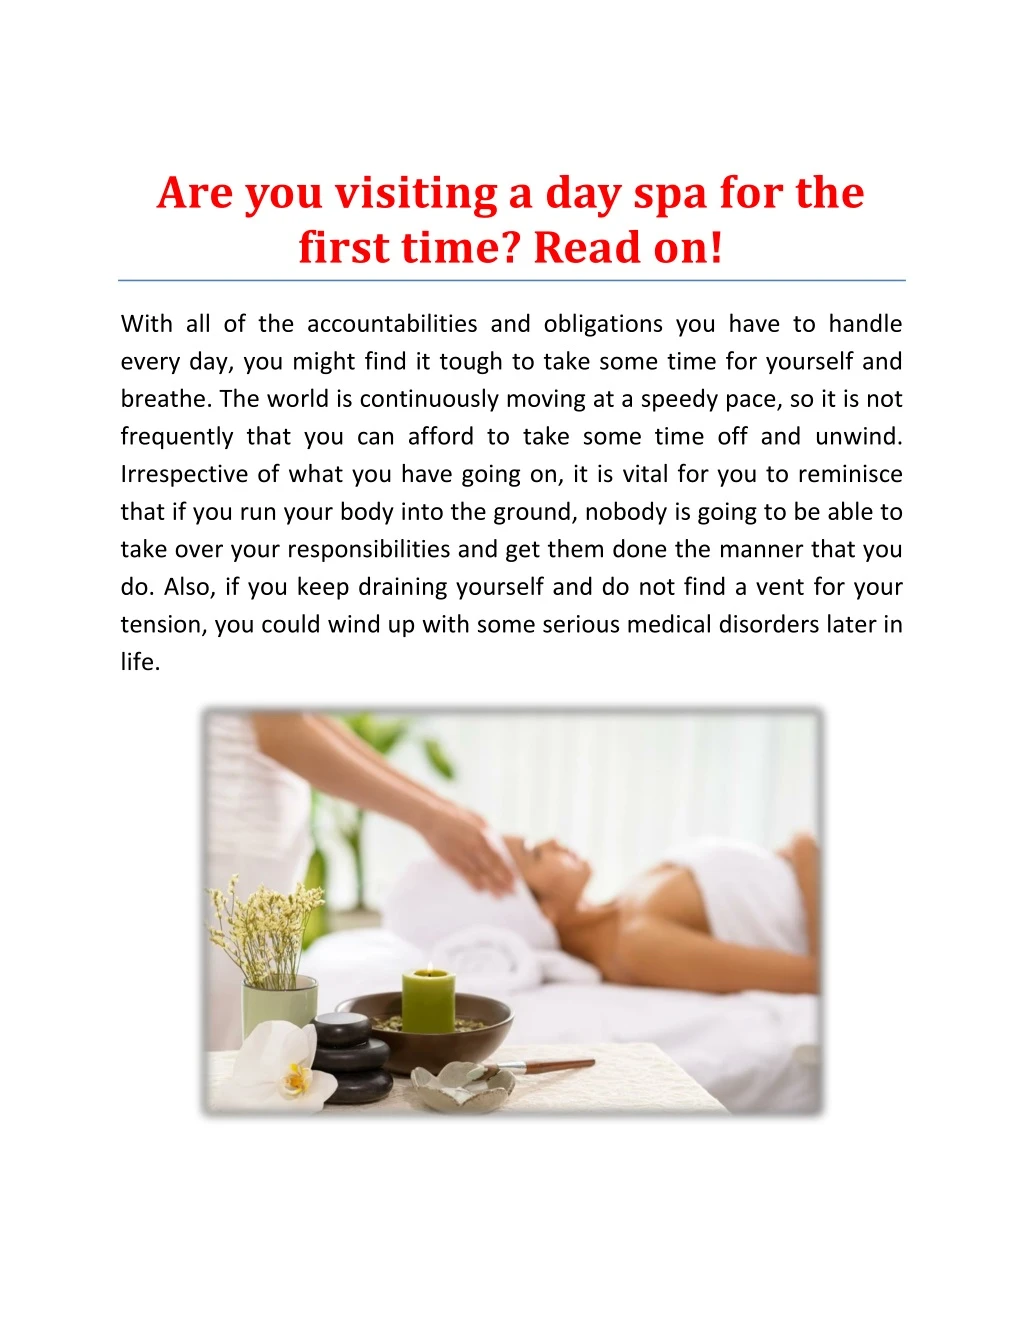 are you visiting a day spa for the first time